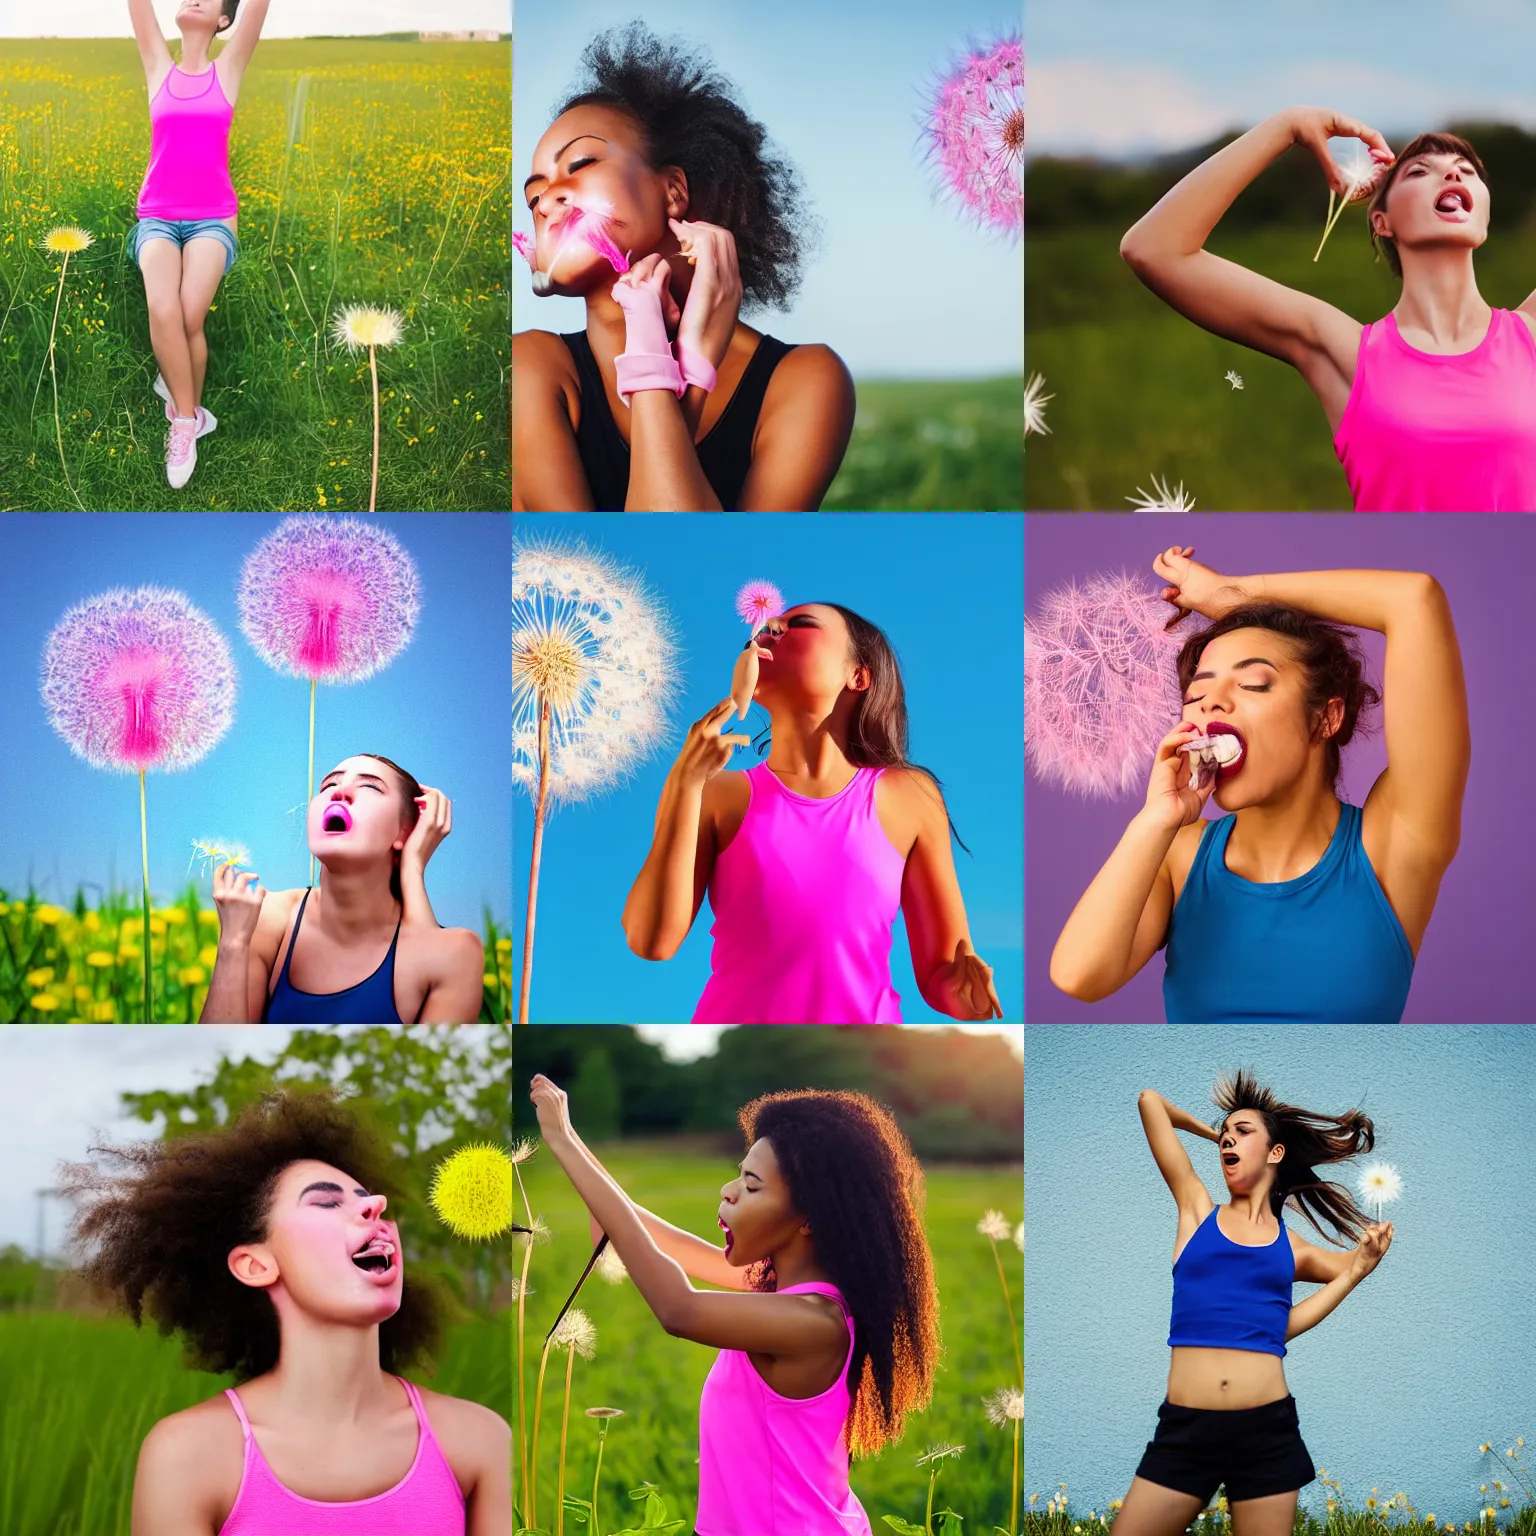 Prompt: “A photograph of a young woman wearing a bright pink racerback tank top opening her mouth wide and taking a very deep breath, in order to blow a dandelion in her hand, bright blue sky background. 4K, high quality.”